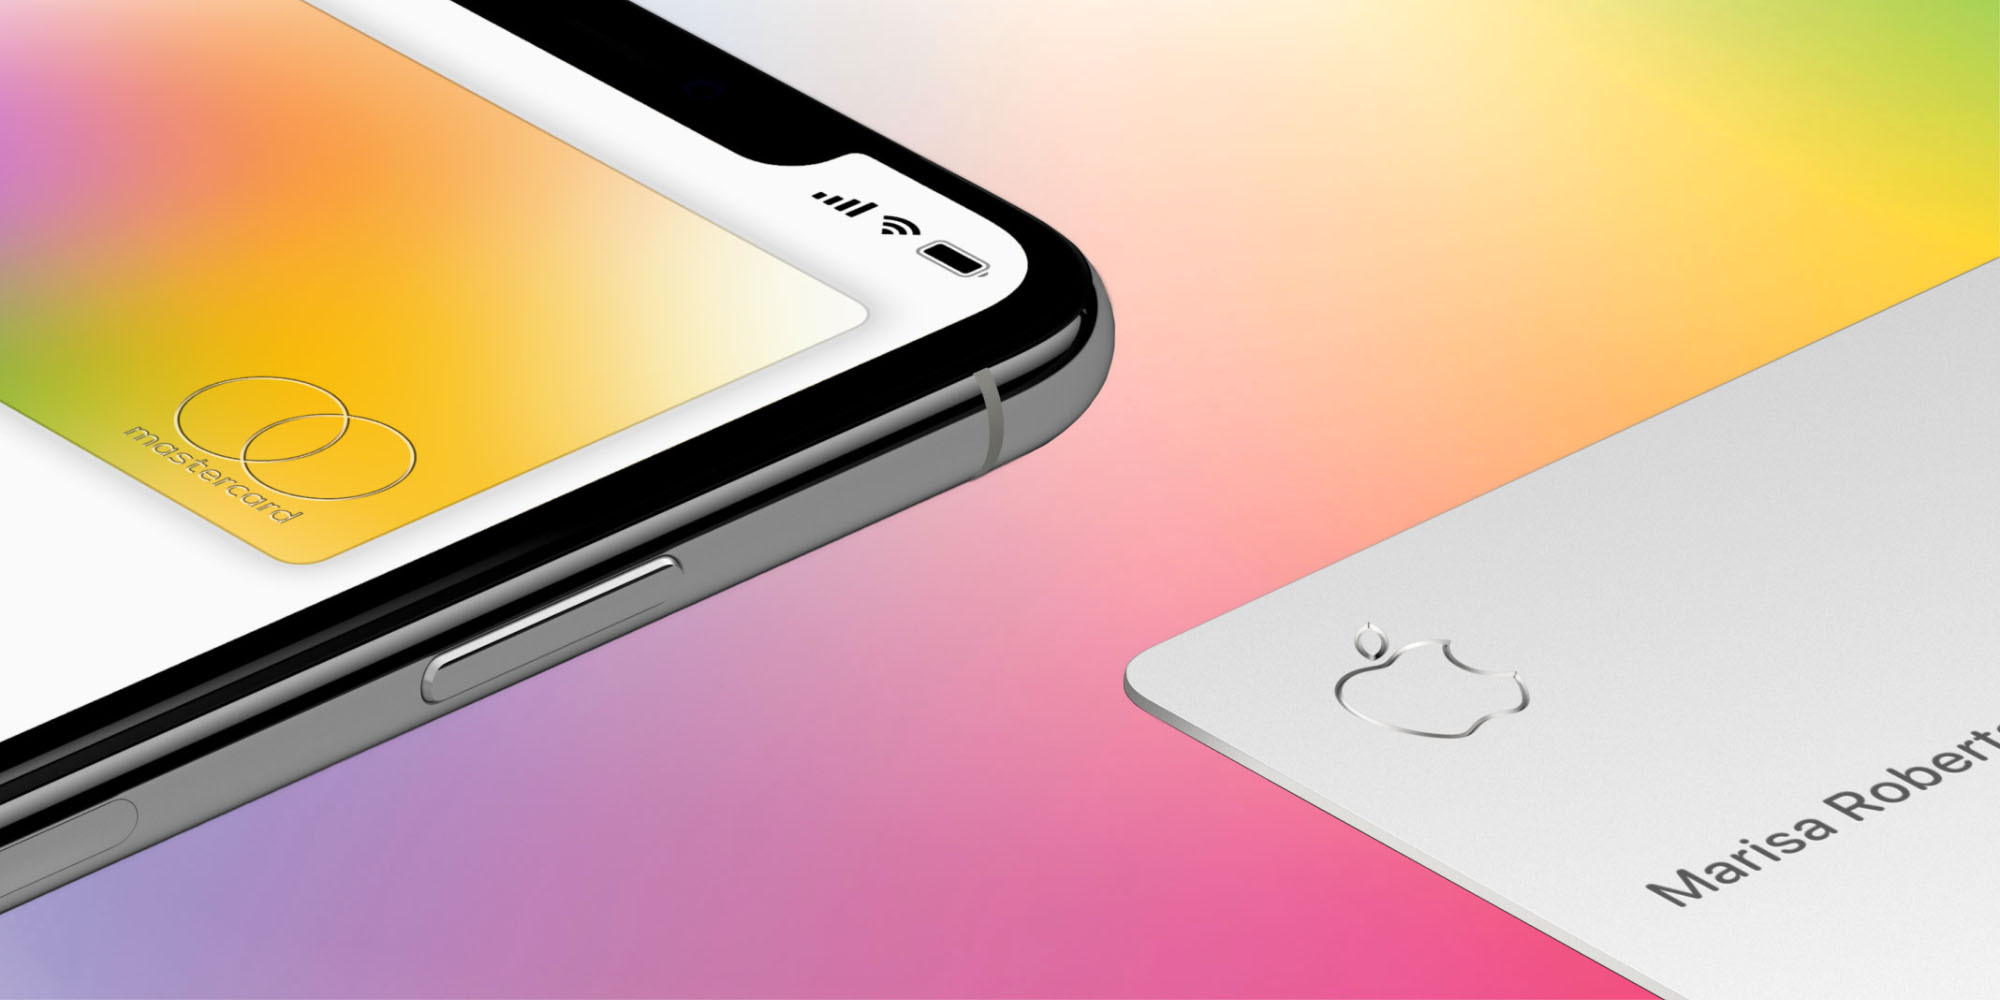 Is the Apple Card worth it? Hereâs what you need to know